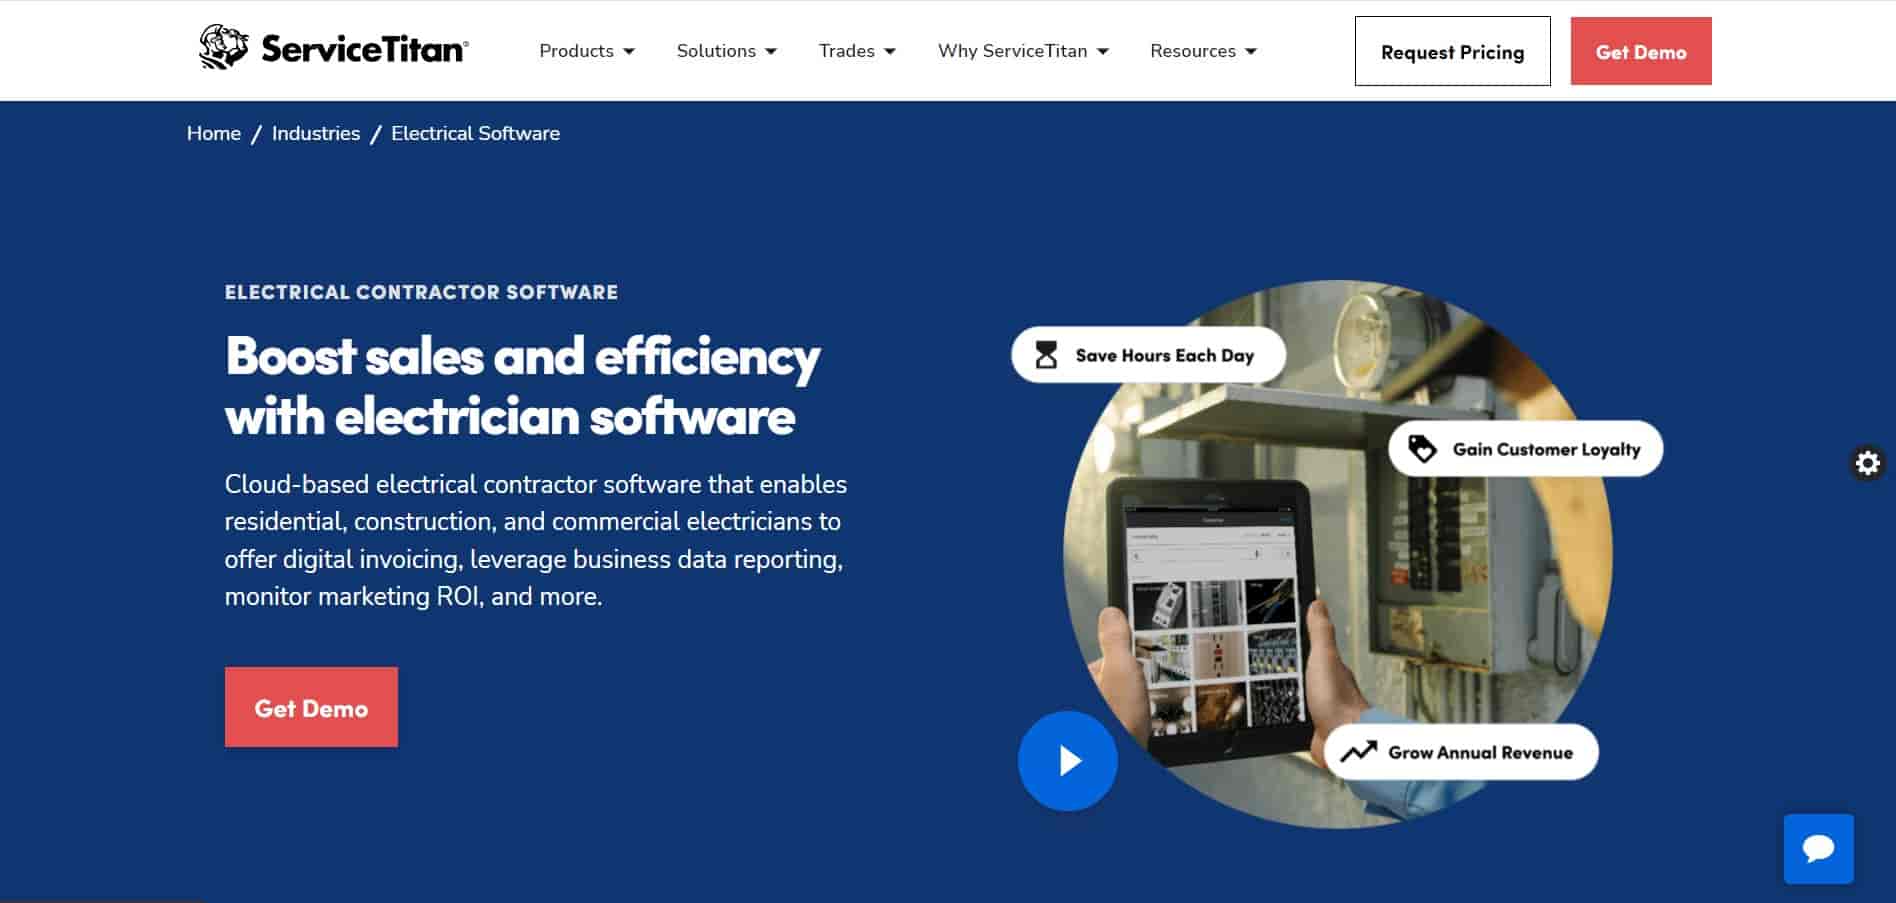 Homepage of one of the best electrical business software ServiceTitan's website.